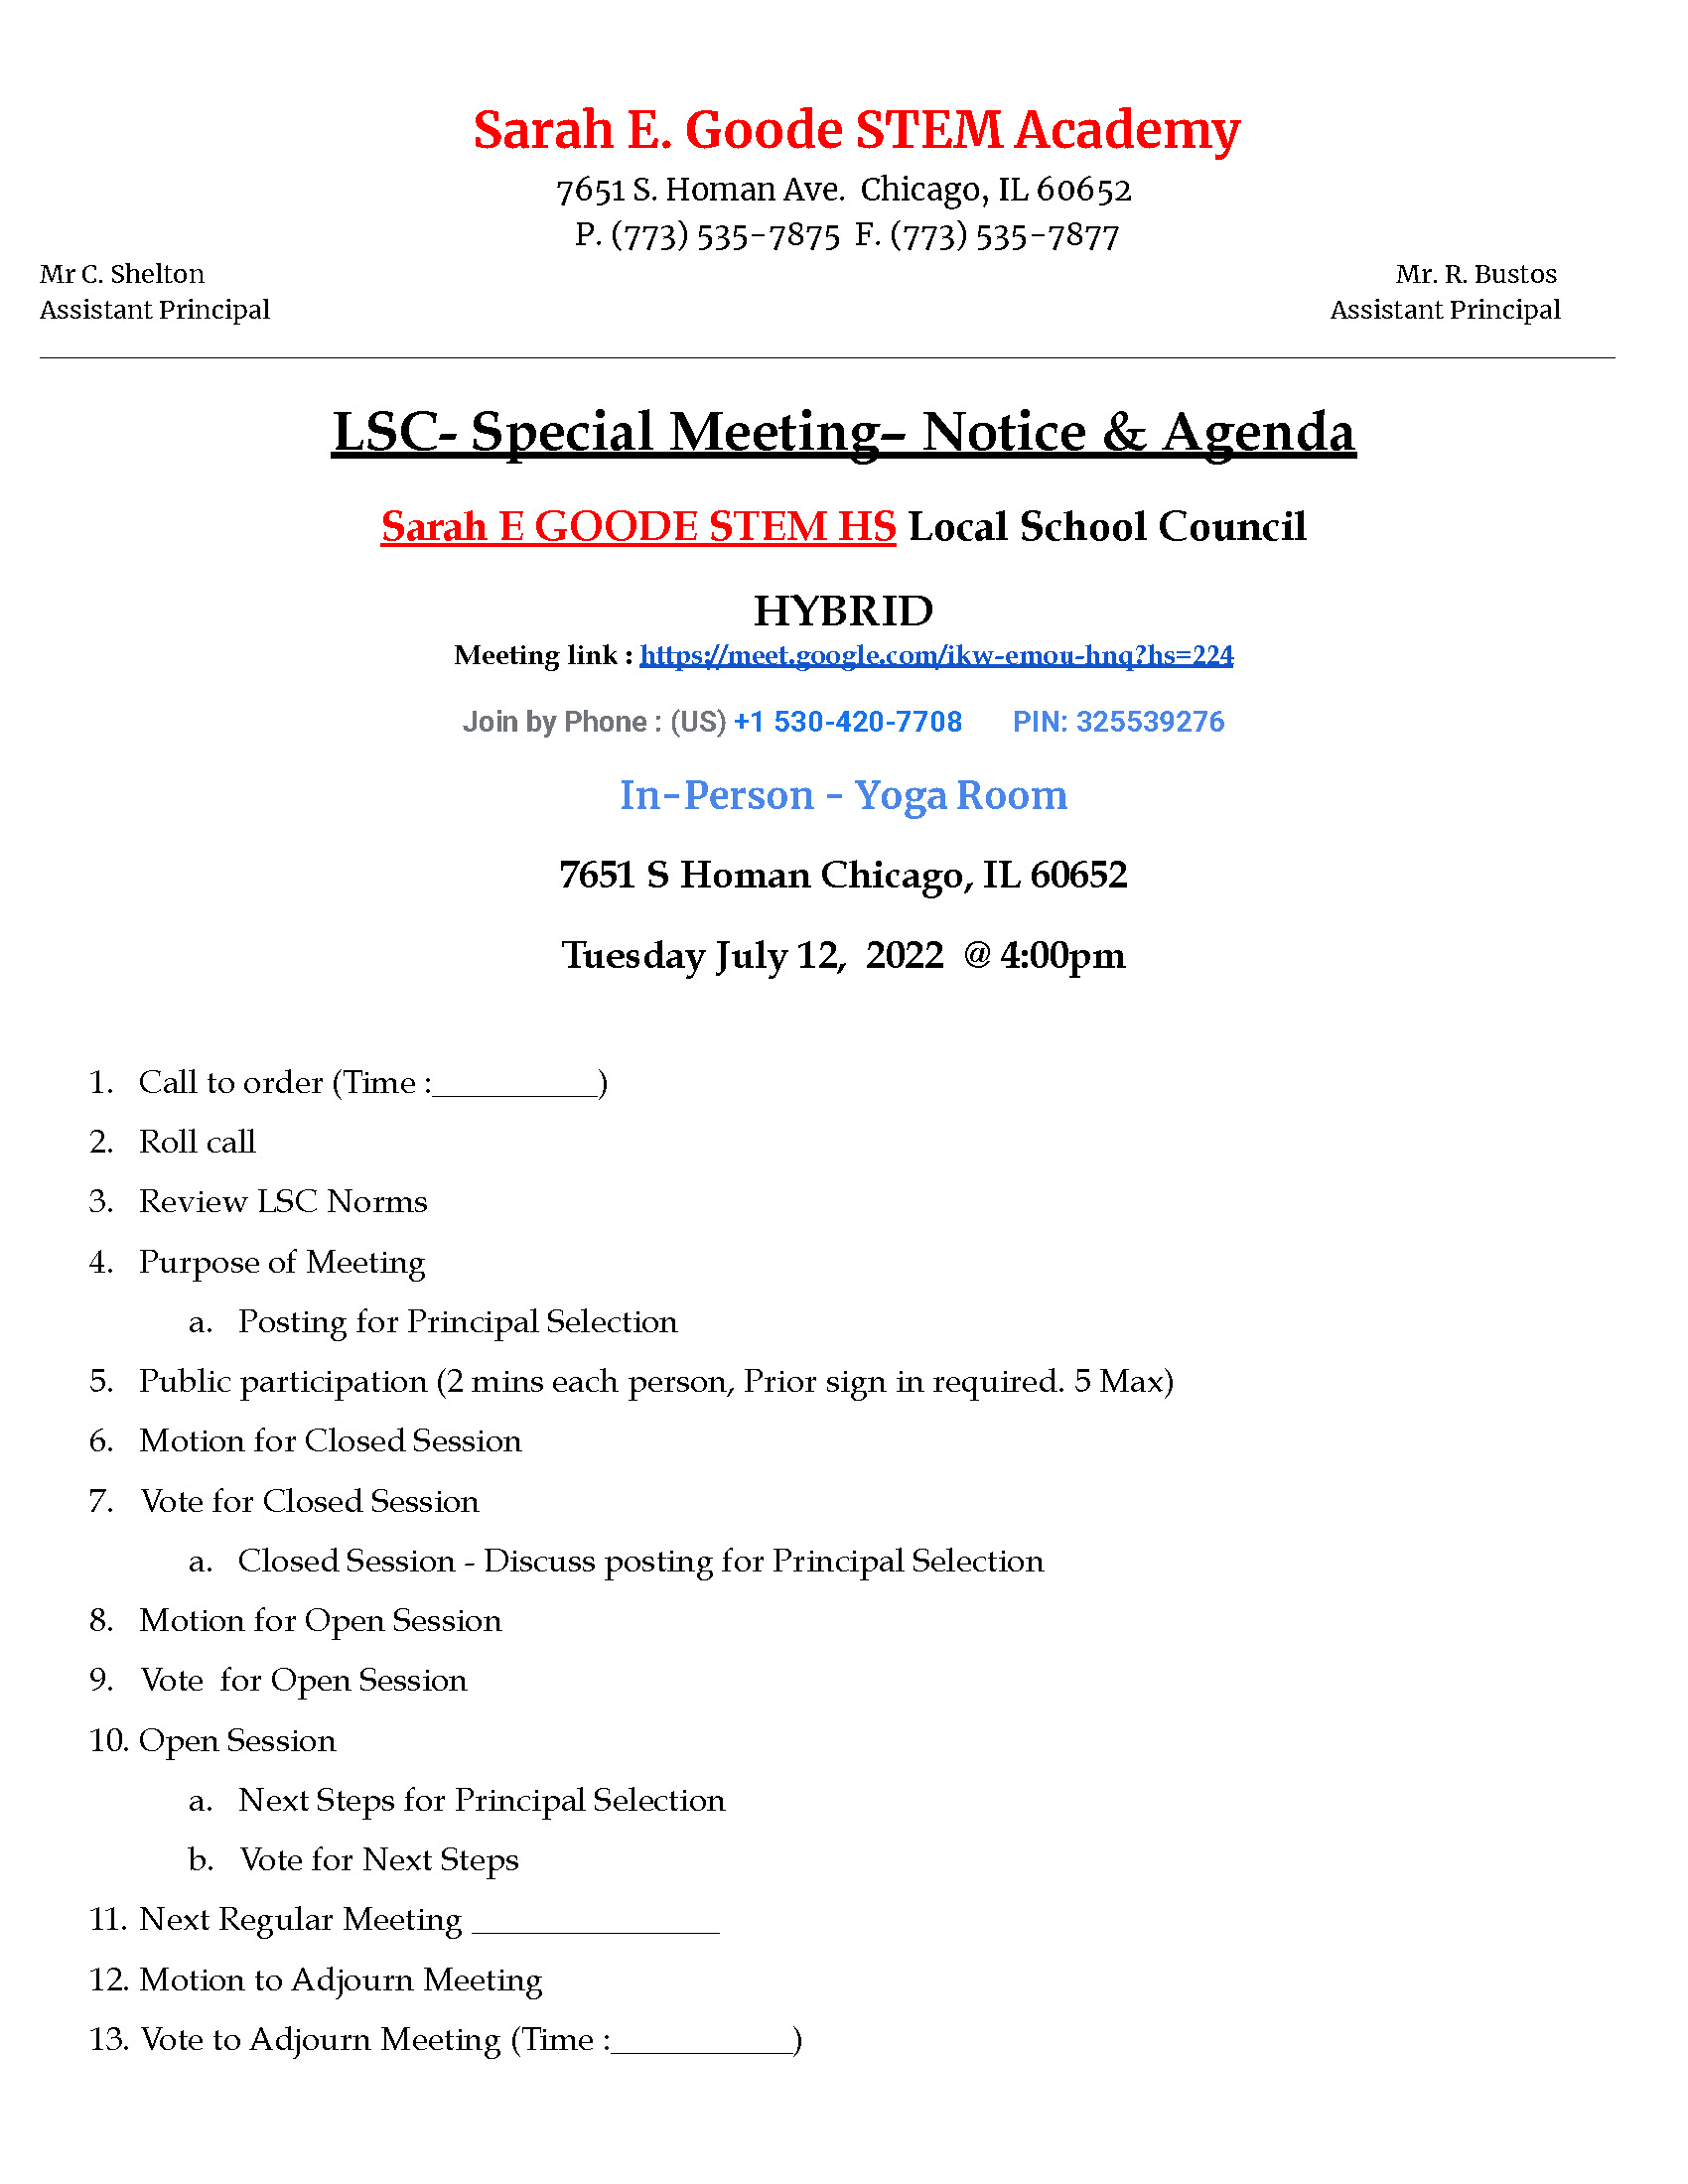 LSC Special Meeting